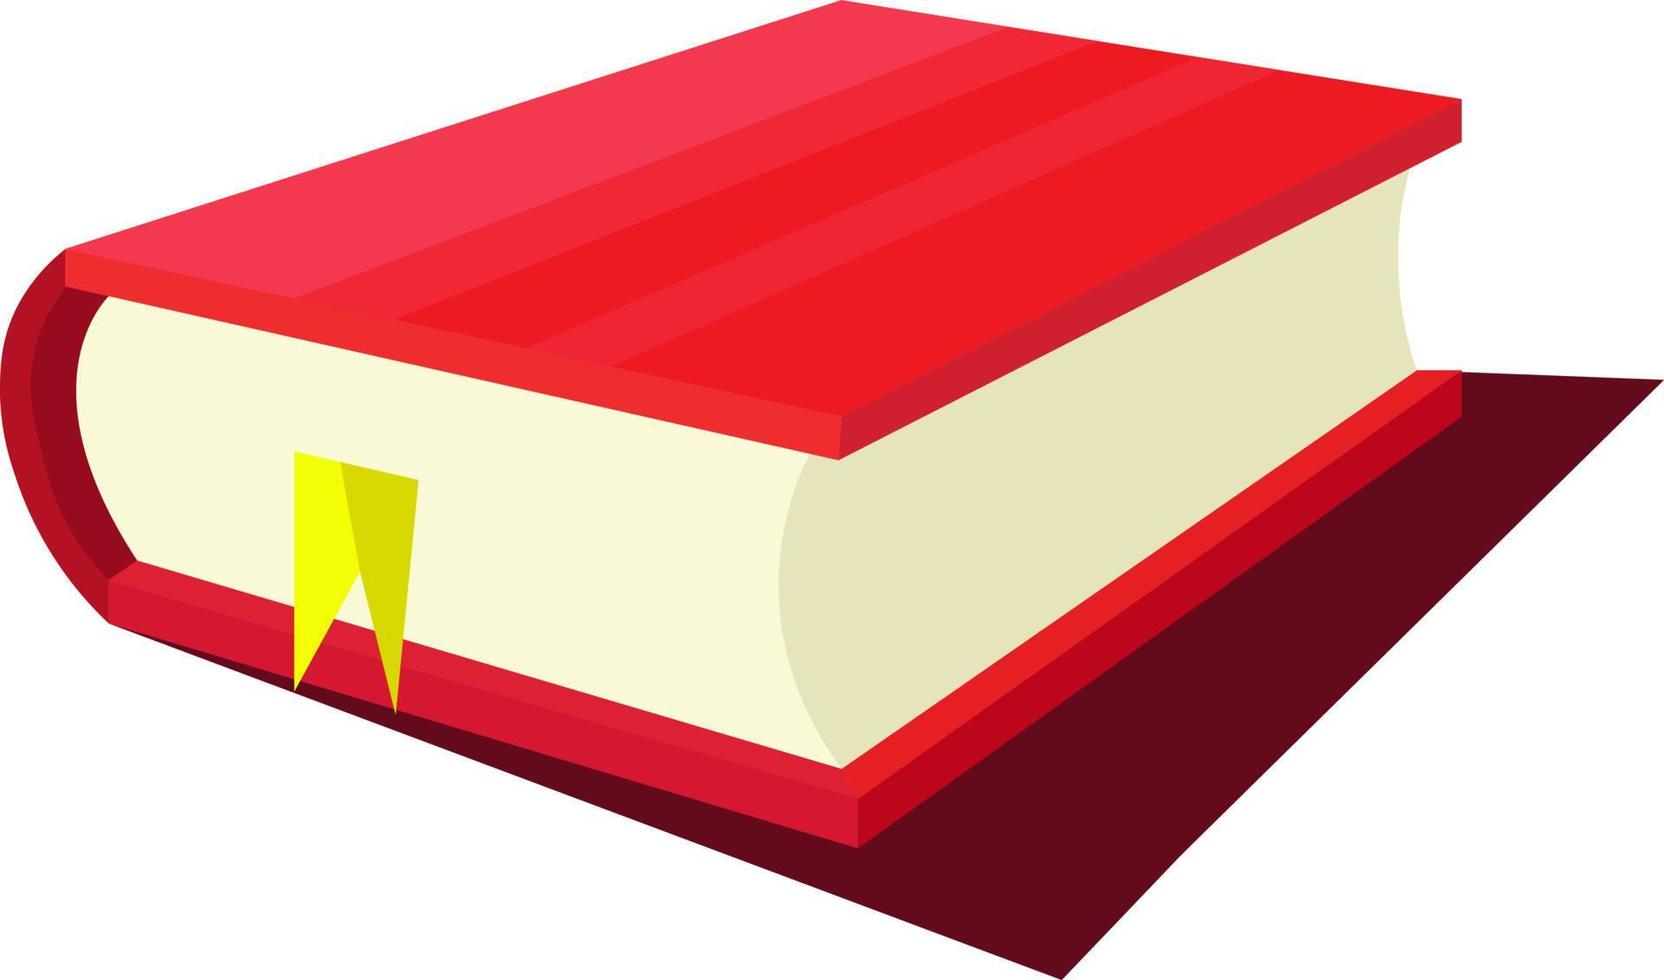 Red book, illustration, vector on white background.